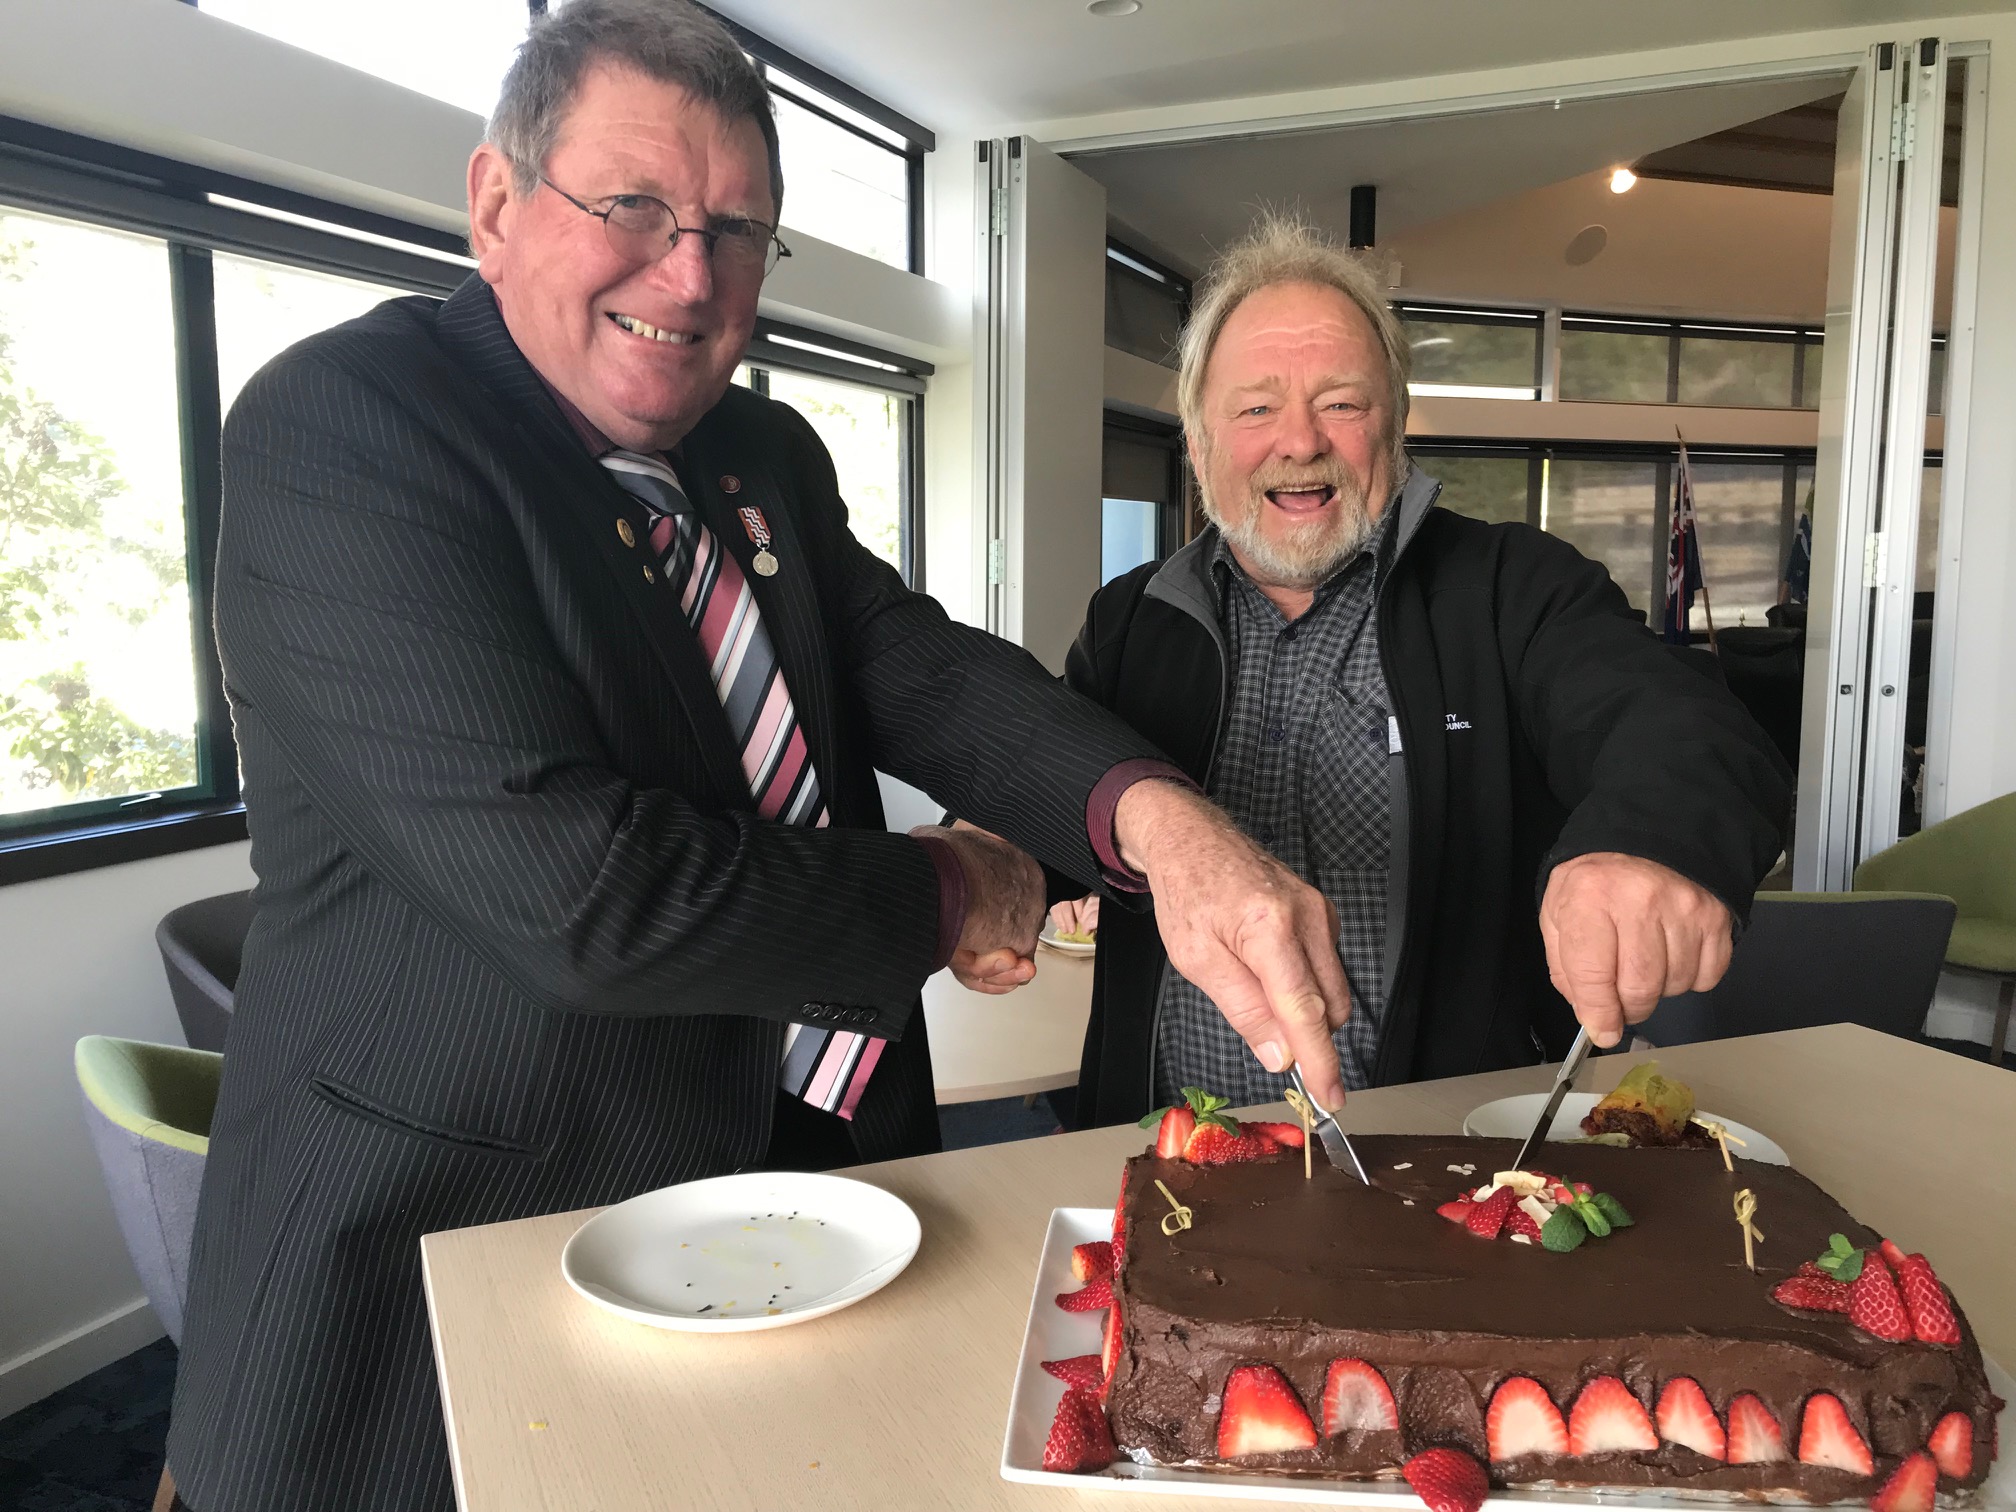 John Pullar (current CLG chair) and Bill Clark (former CLG Chair) cut a cake to say thank you to the Liaison Group for many years of hard work.